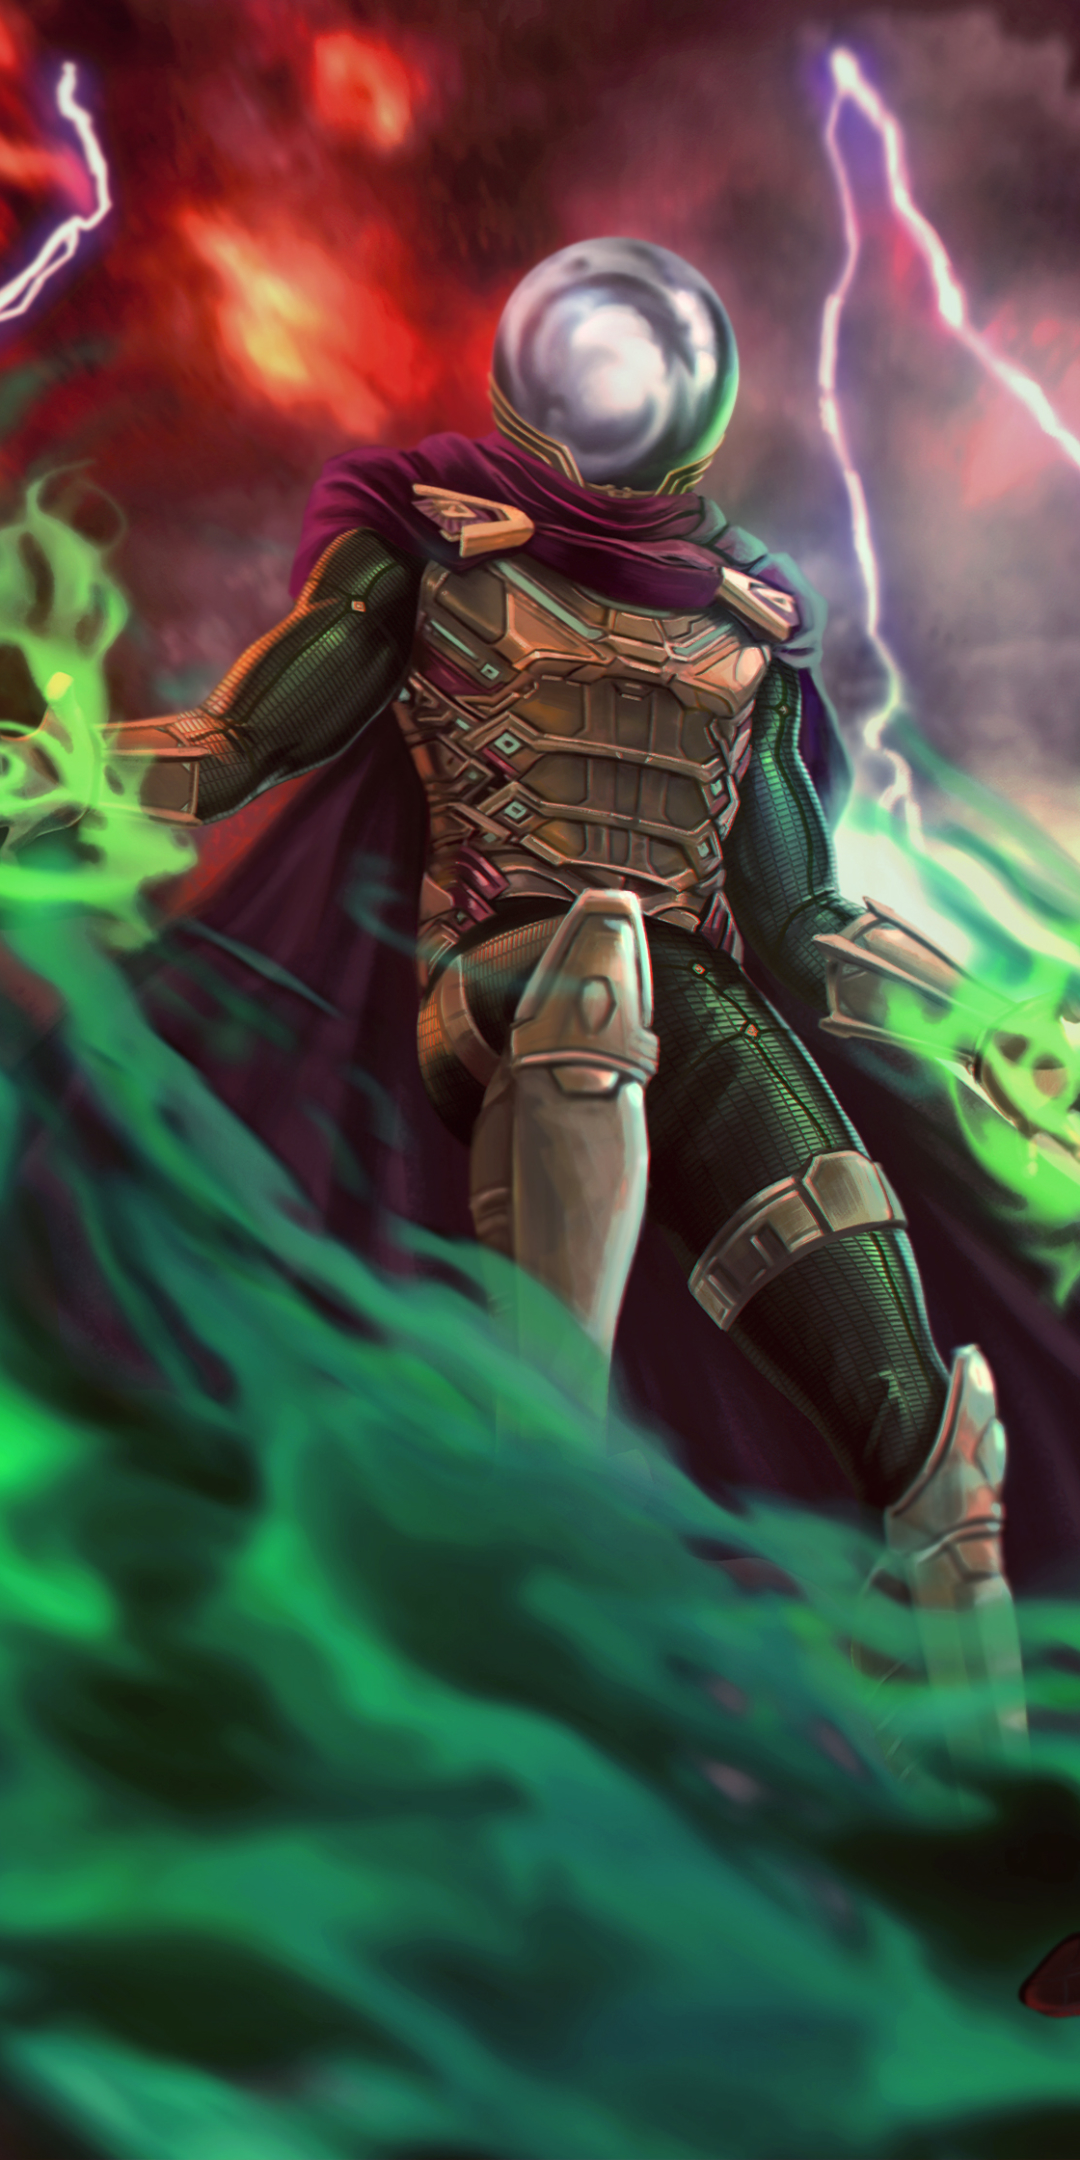 mysterio (marvel comics), movie, spider man: far from home, spider man wallpaper for mobile